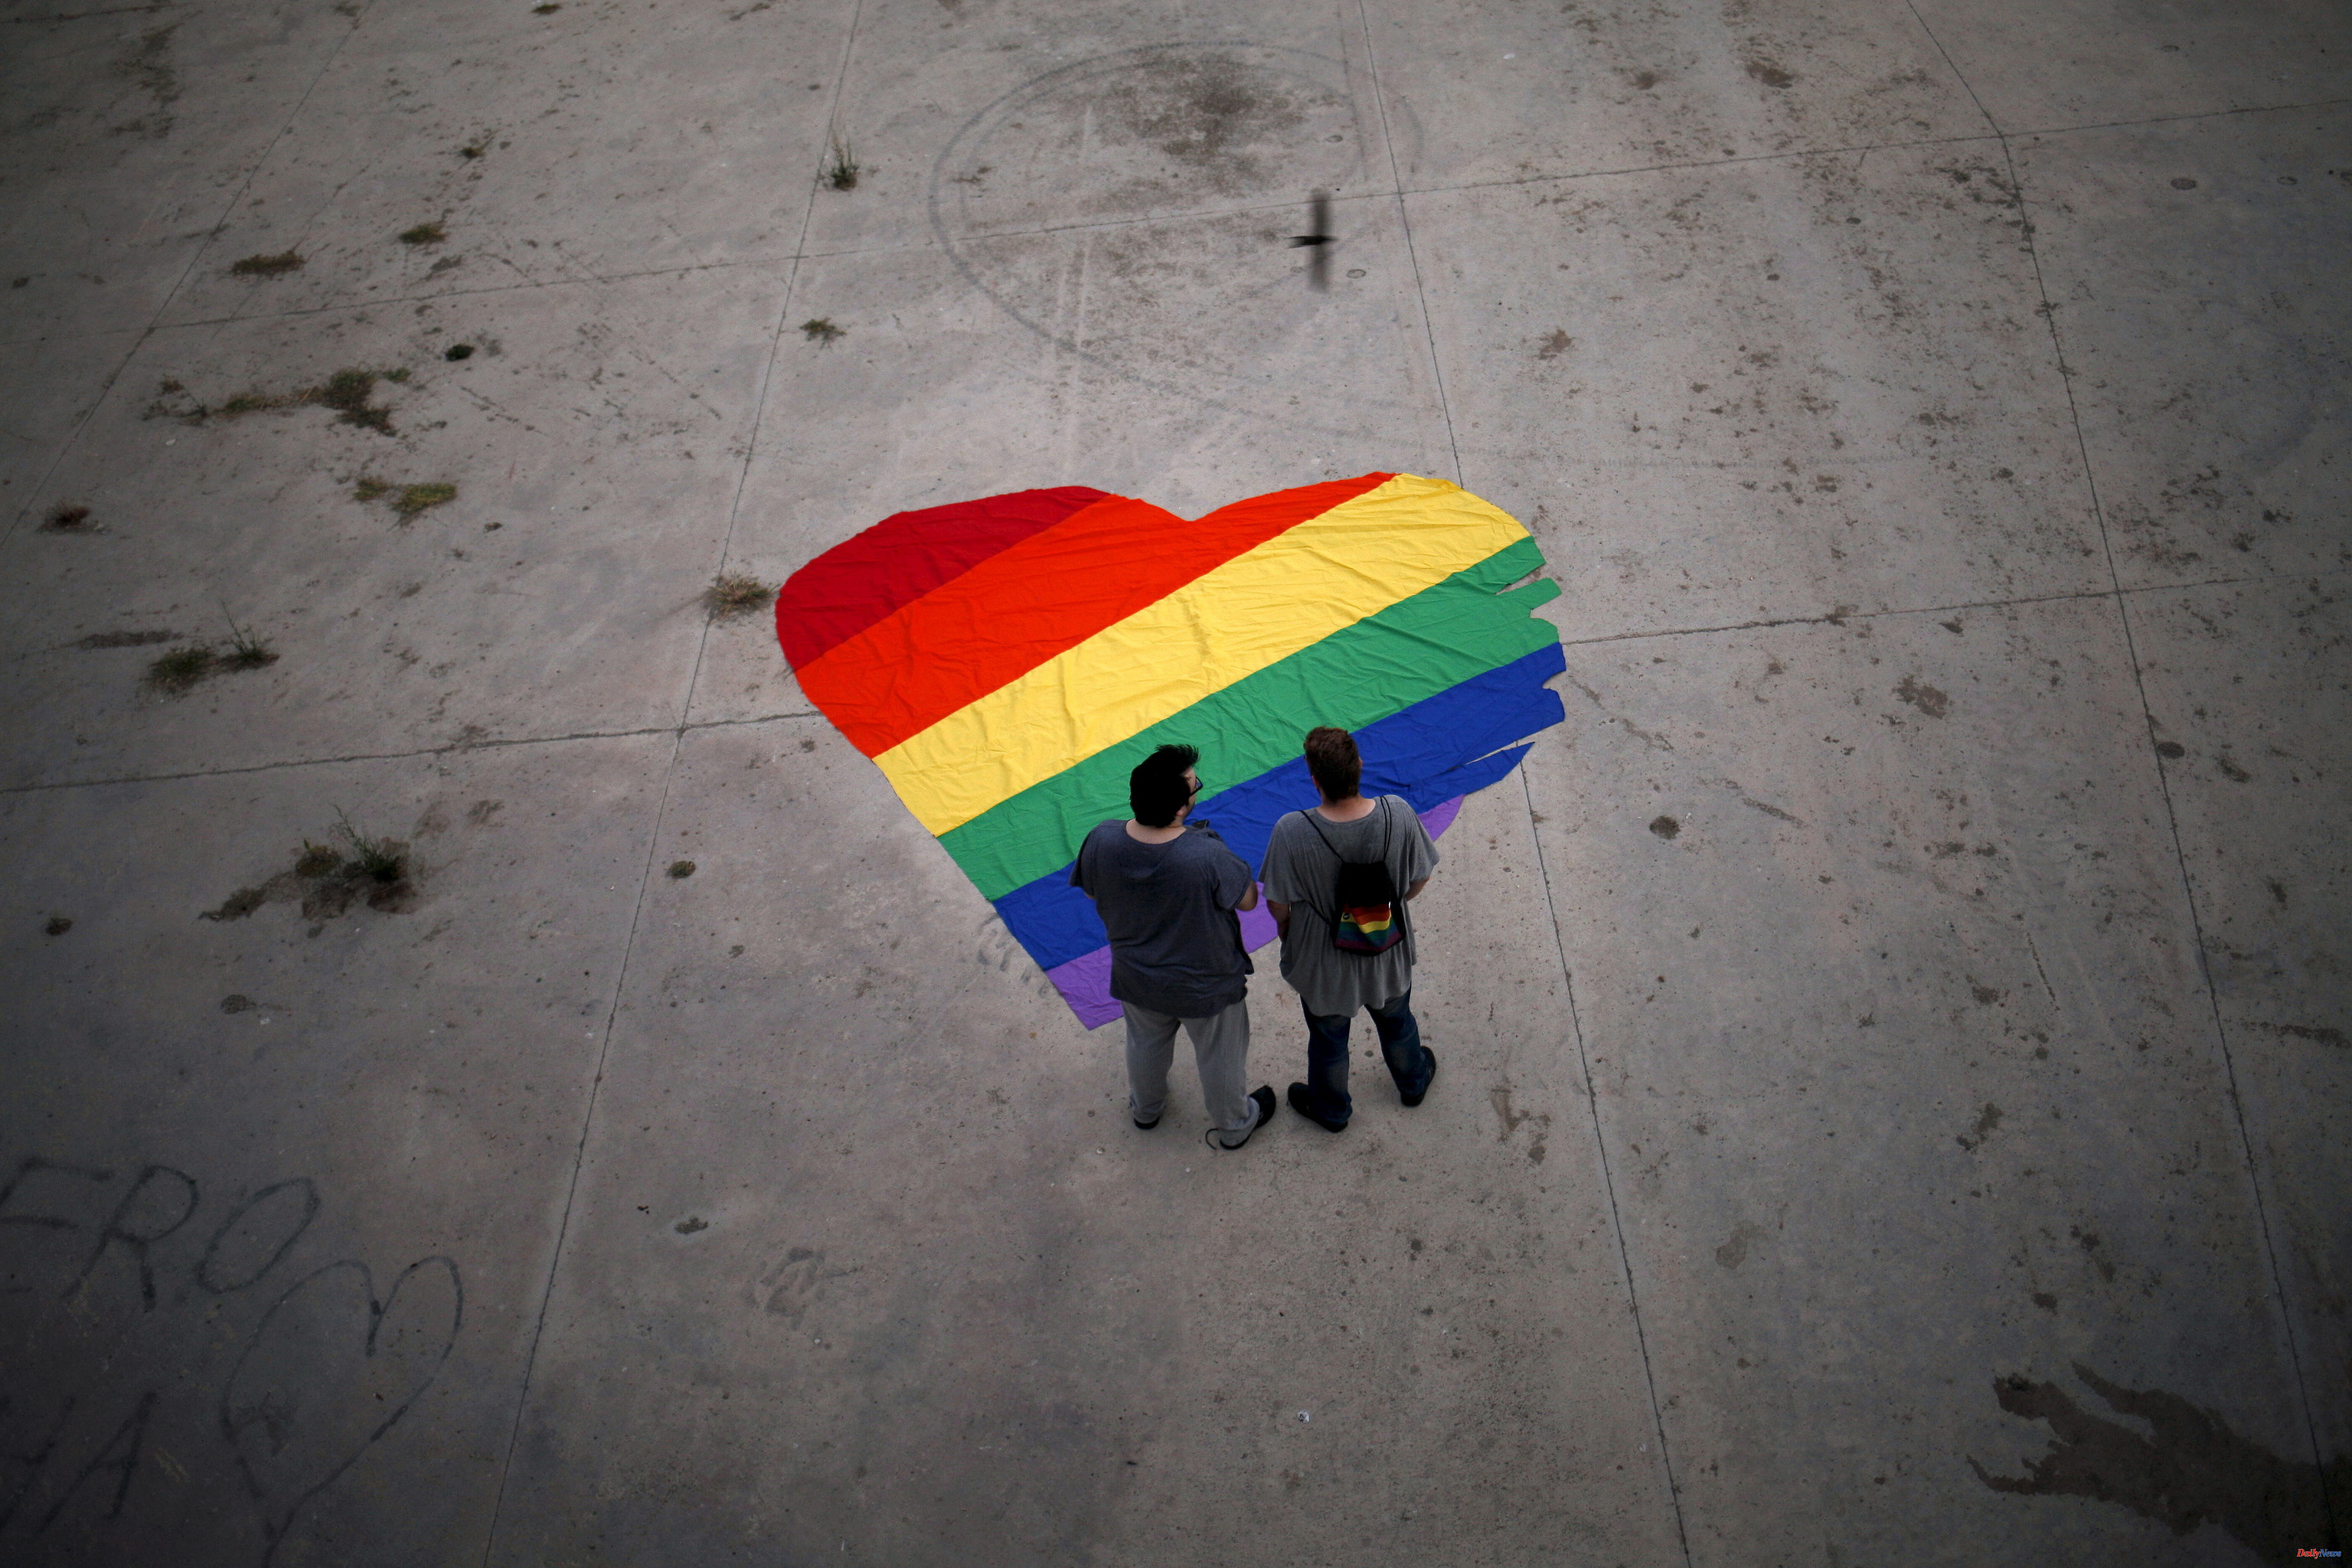 Italy Meloni's offensive against gay families shakes Italy